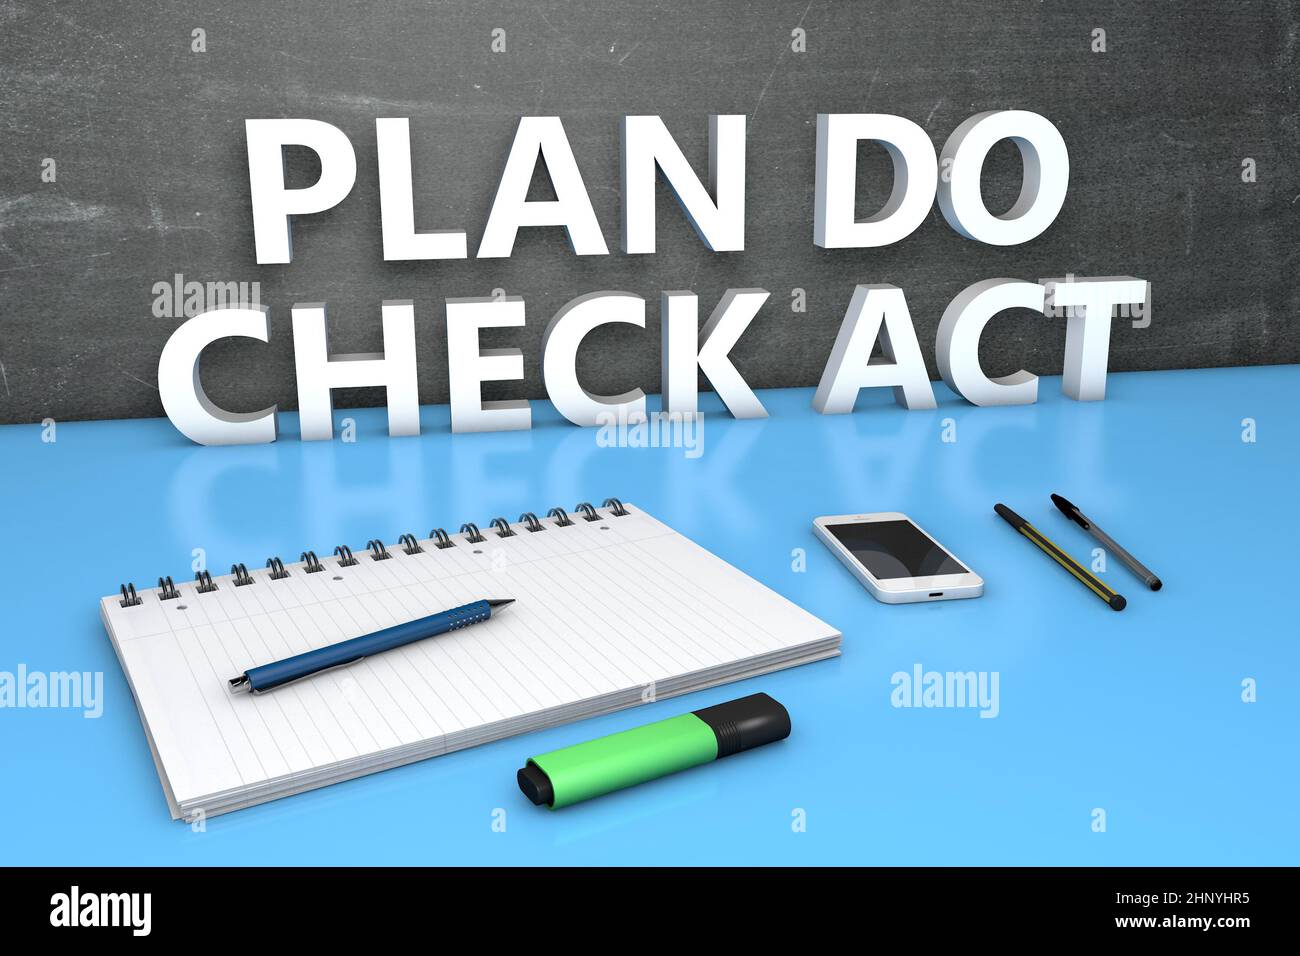 PDCA - Plan Do Check Act - text concept with chalkboard, notebook, pens and mobile phone. 3D render illustration. Stock Photo